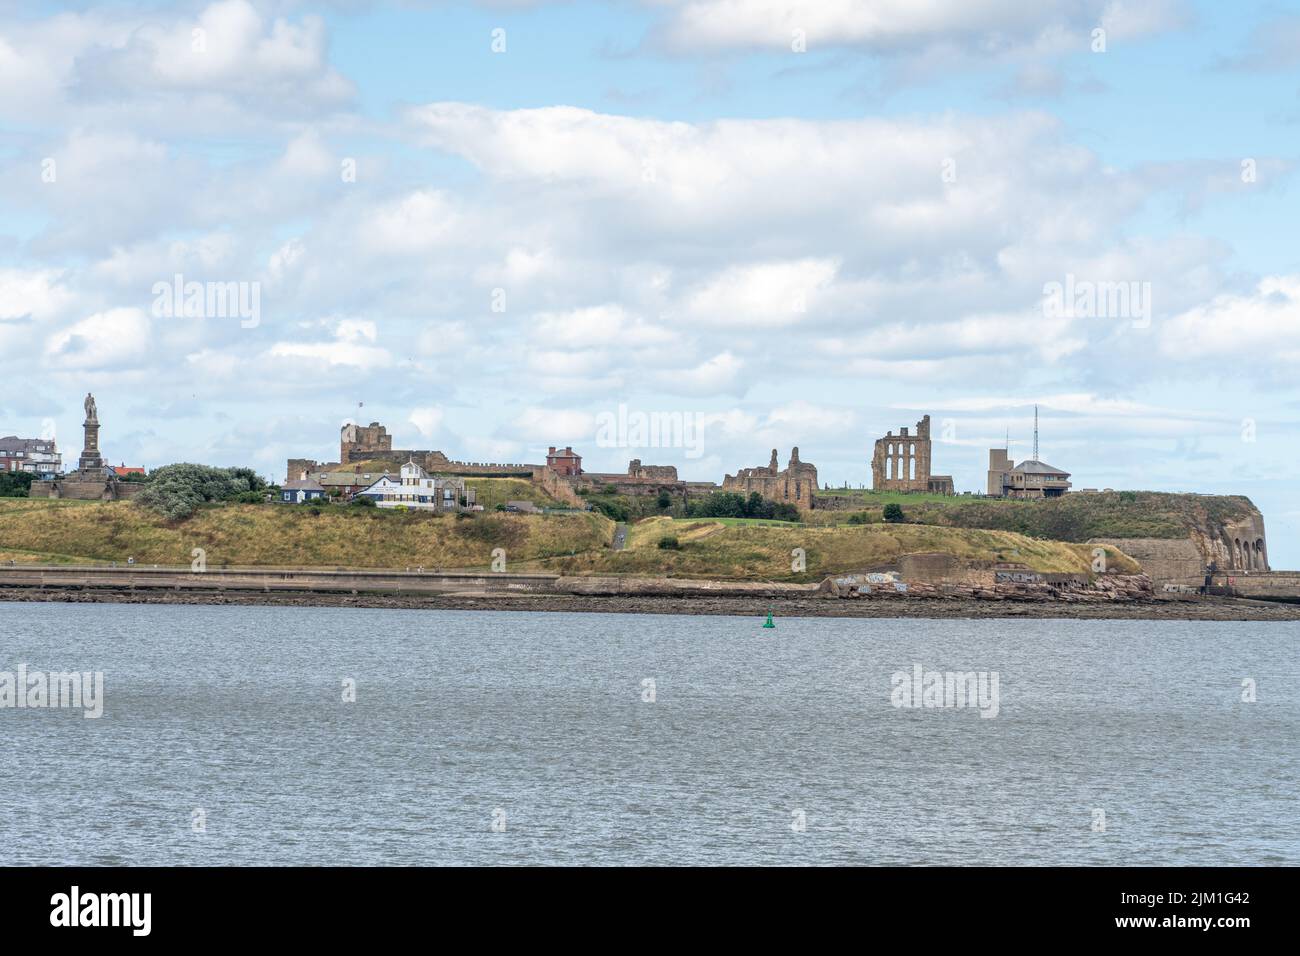 A riverscape view of Tynemouth Priory and castle and the Collingwood Monument in Tynemouth, North Tyneside, UK. Stock Photo